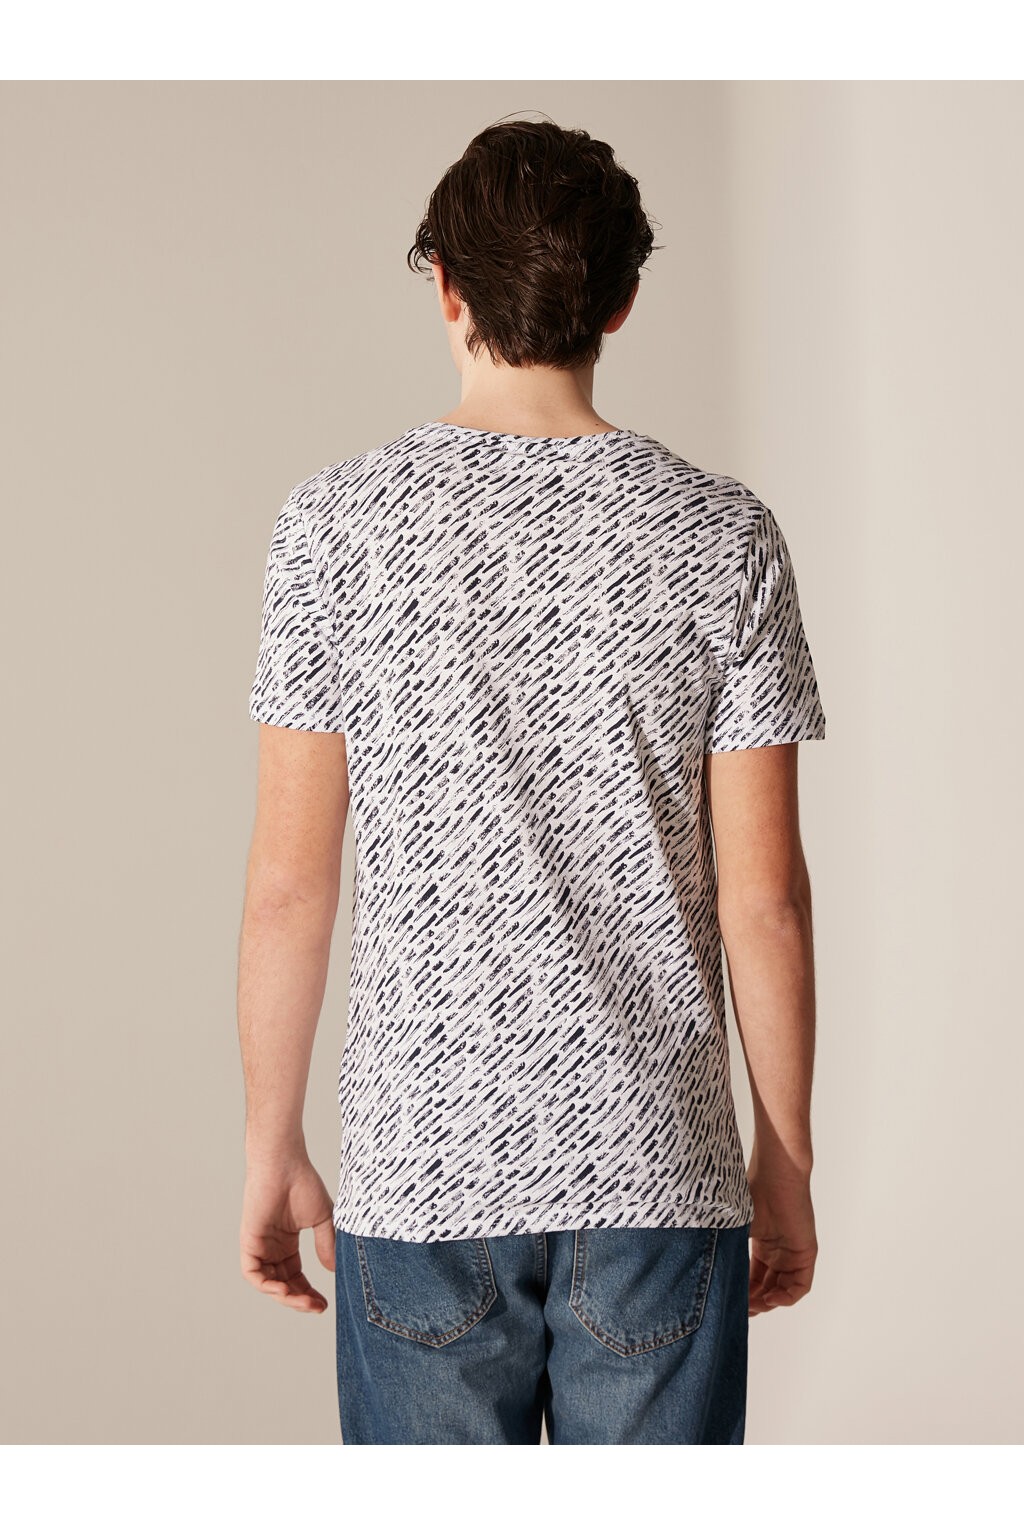 Men's T-shirt with a pattern